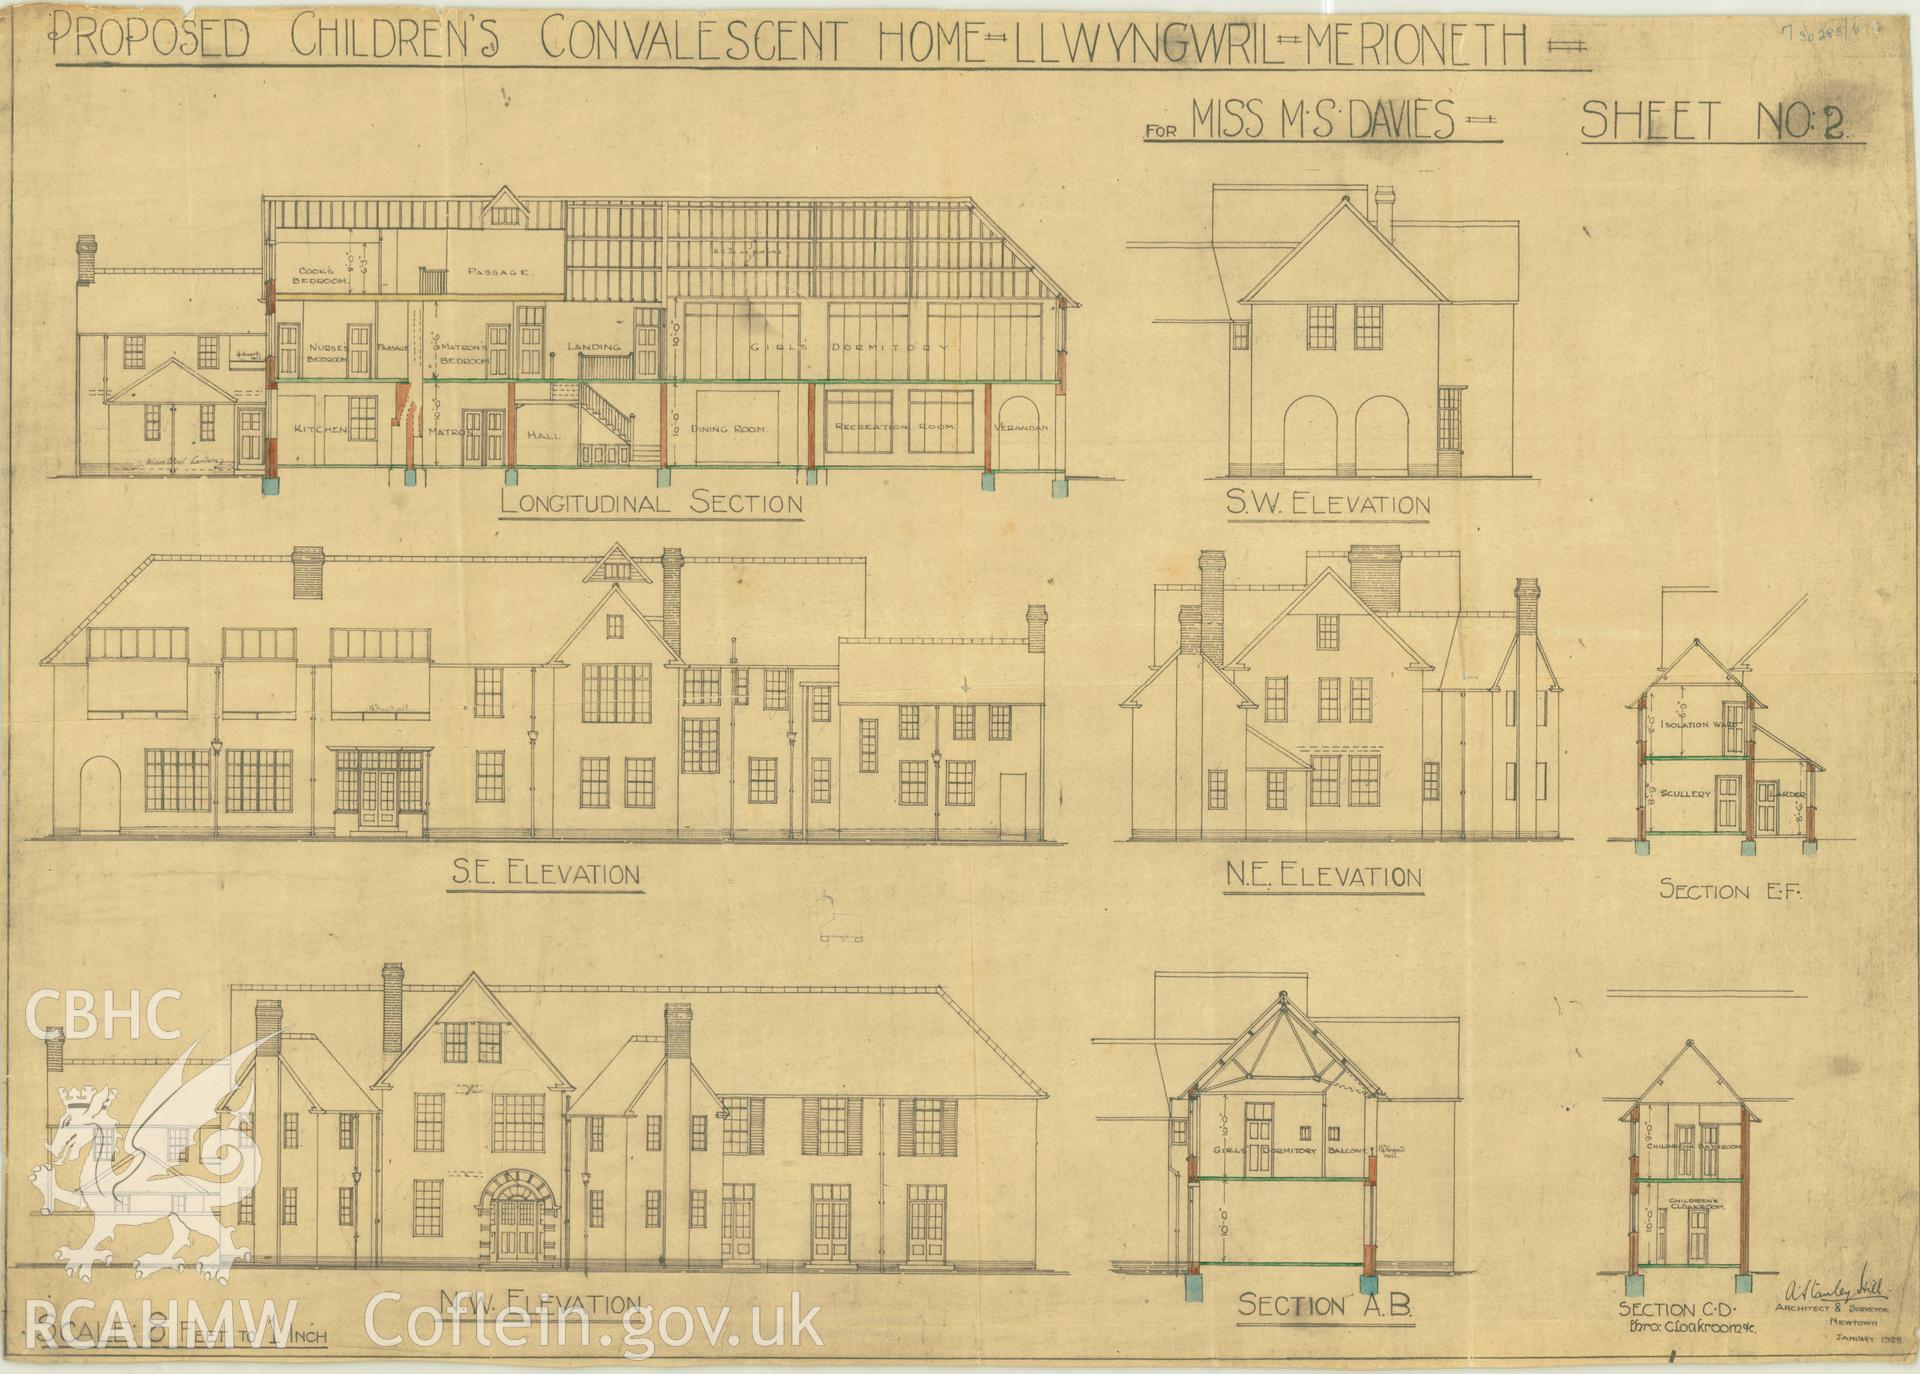 Ty Gwyn, Llangelynin; digitized copy of measured drawings of the proposed Children's Convalescent Home at Llwyngwril, produced by A. Stanley Cox, architect and surveyor of  of Newtown,  loaned for copying by Gwilym Jones of Snowdonia National Park.